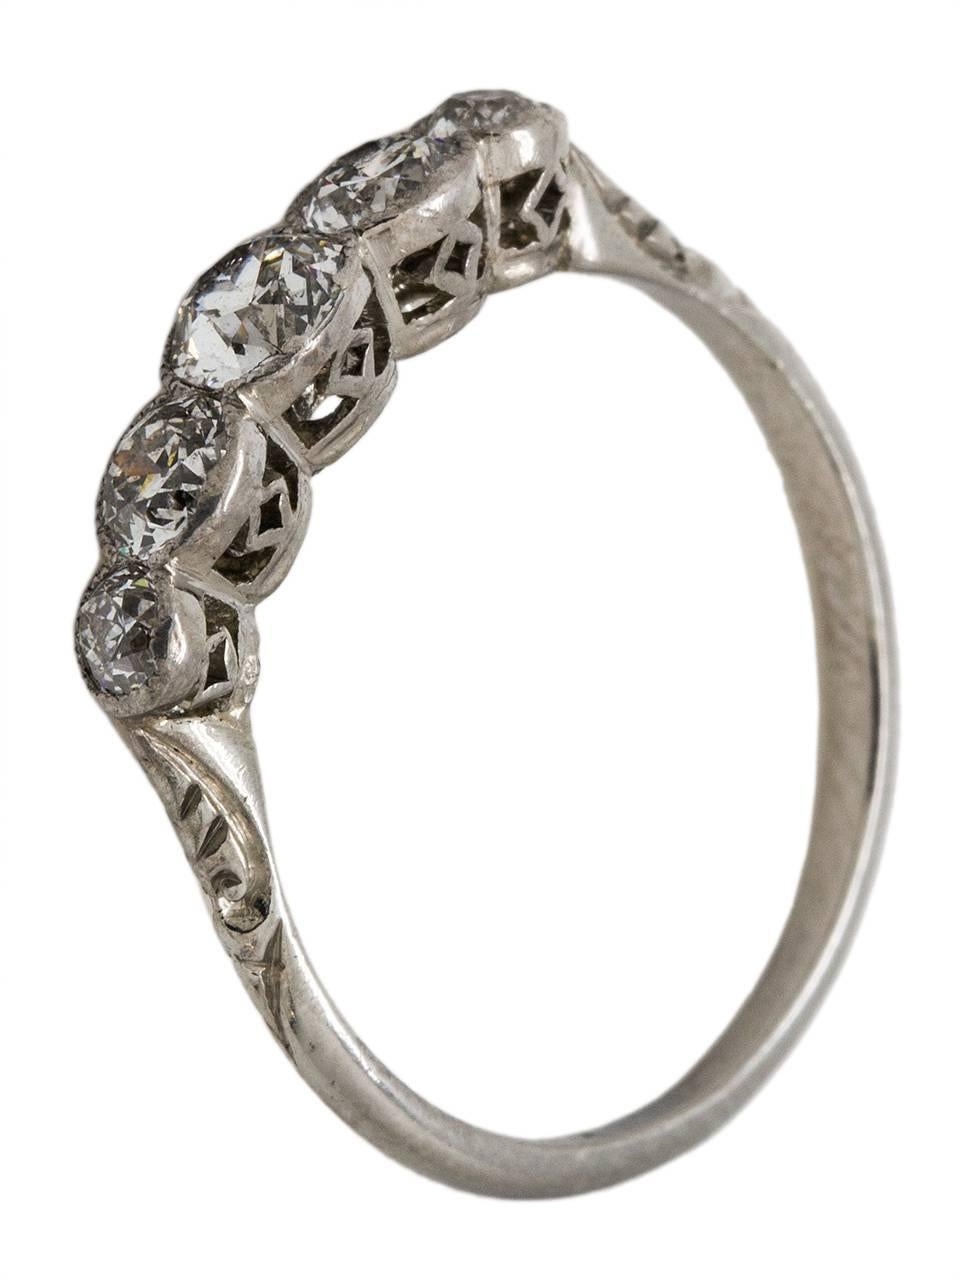 This lovely platinum diamond band is a wonderful example of Edwardian design with its intricately detailed elevated settings and romantic engraving down the sides of the shank. Each bright and lively Old European Cut diamond is bezel set and exhibit